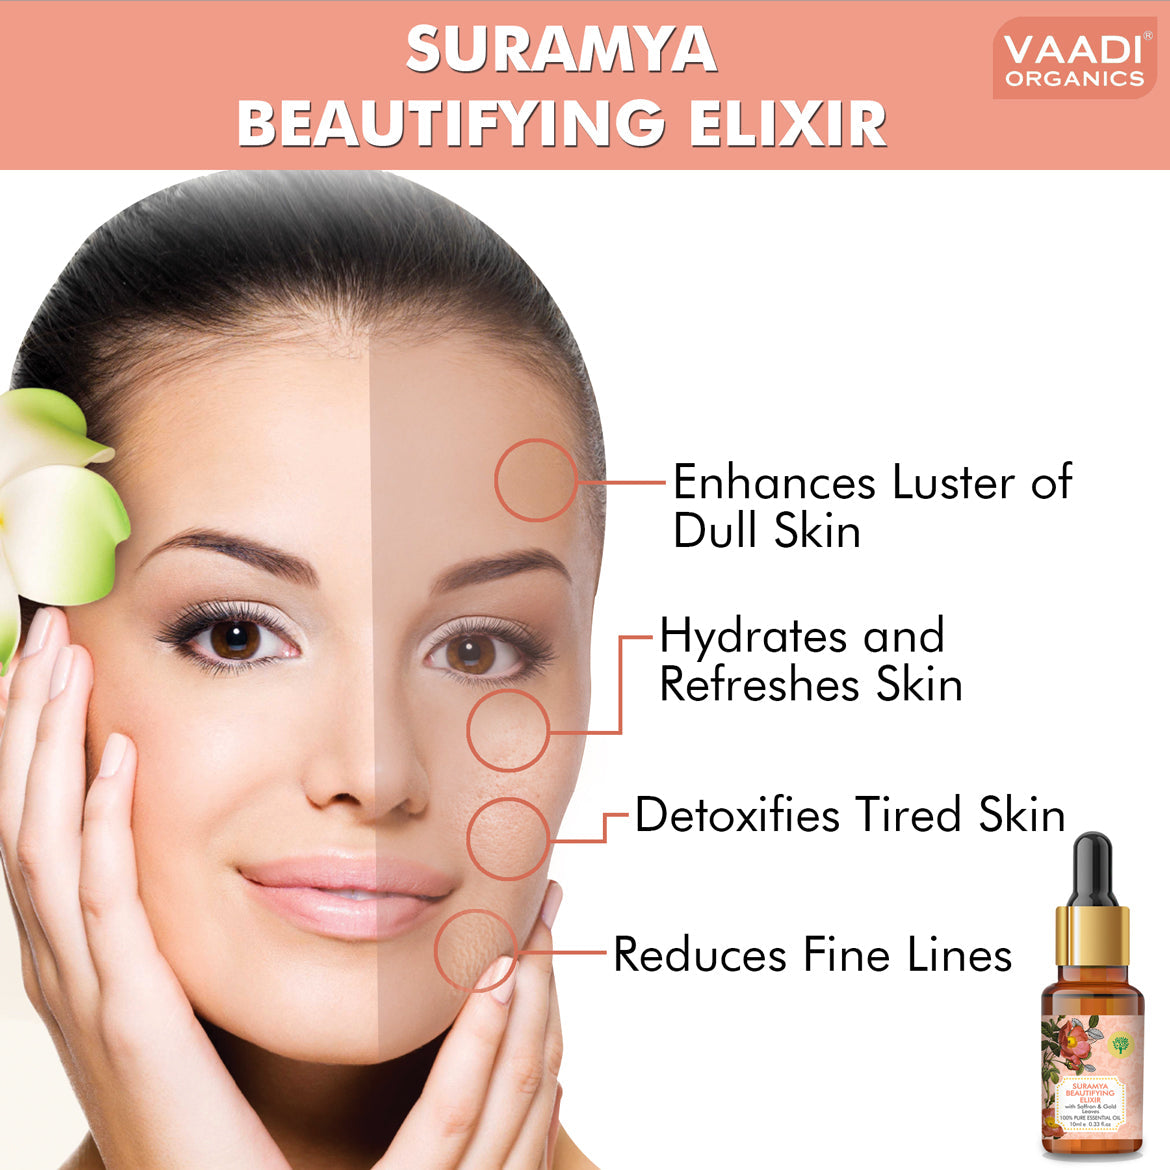 Pack of 2 Organic Suramya Beautifying Elixr  - Reduces Fine Lines, Improves Skin Complexion & Gives a Natural Glow